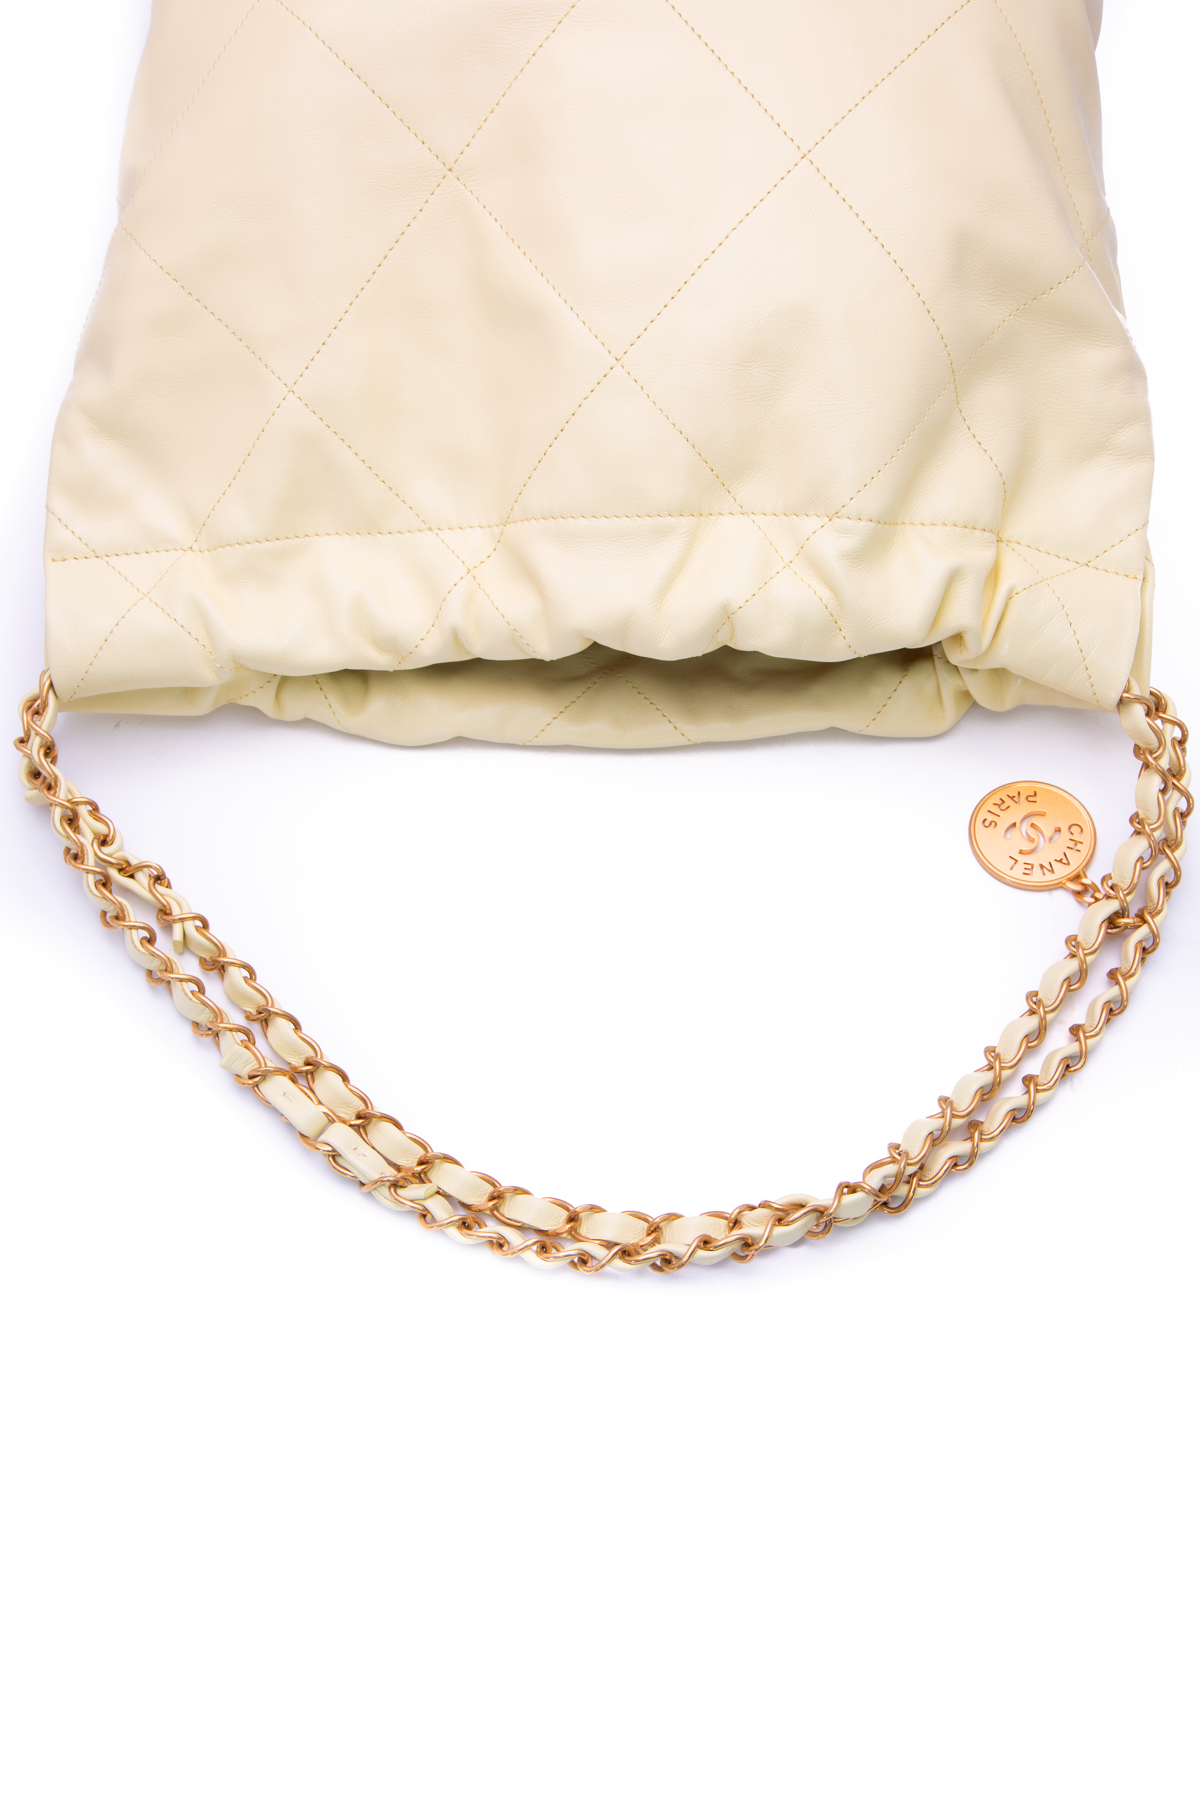 Chanel-22 Hobo with Pouch - Couture Traders